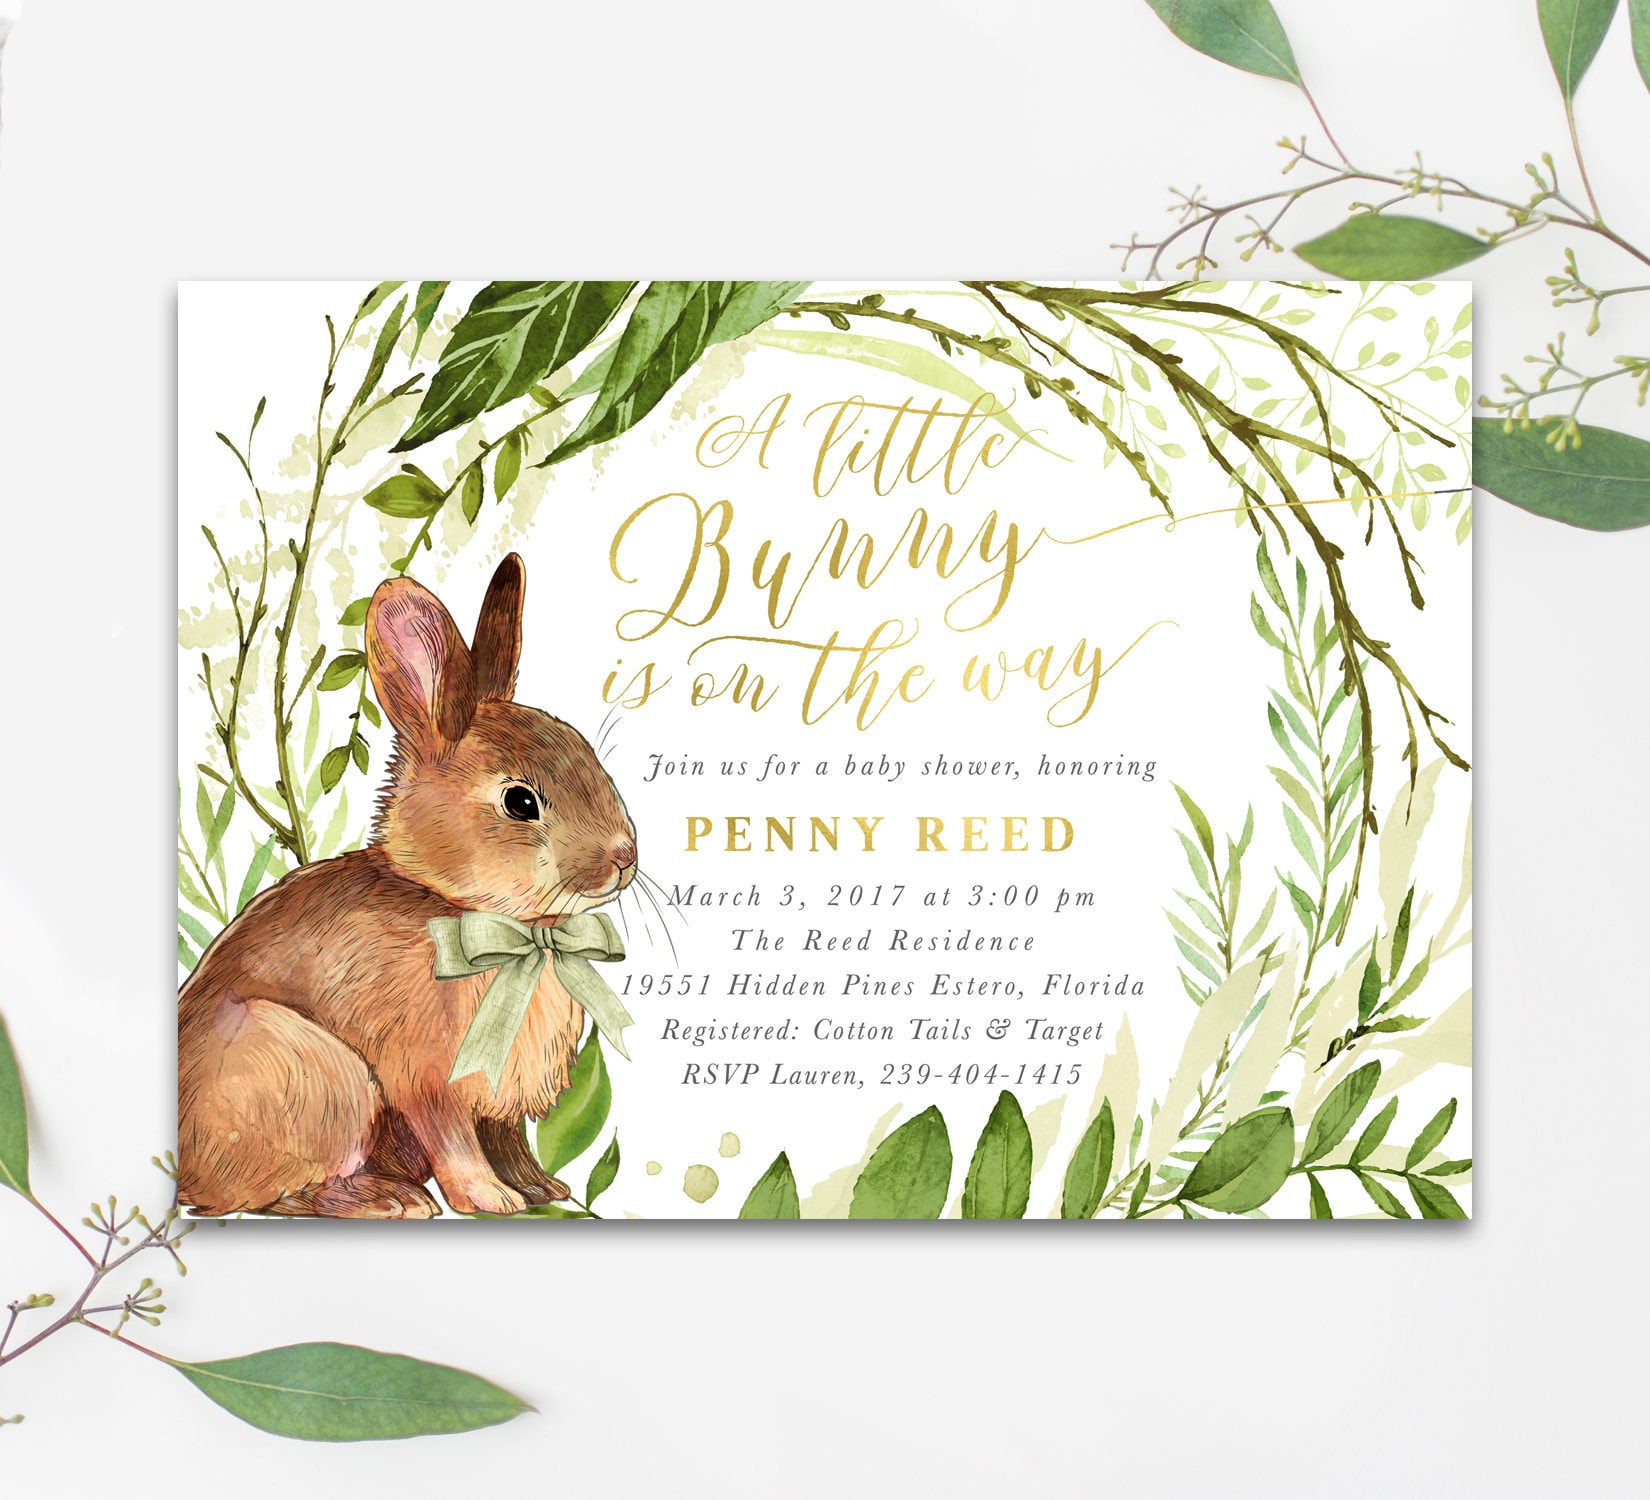 Bunny Baby Shower Invitation, A Little Is On The Way Invite, Girl/Boy Invitation - Green Penny